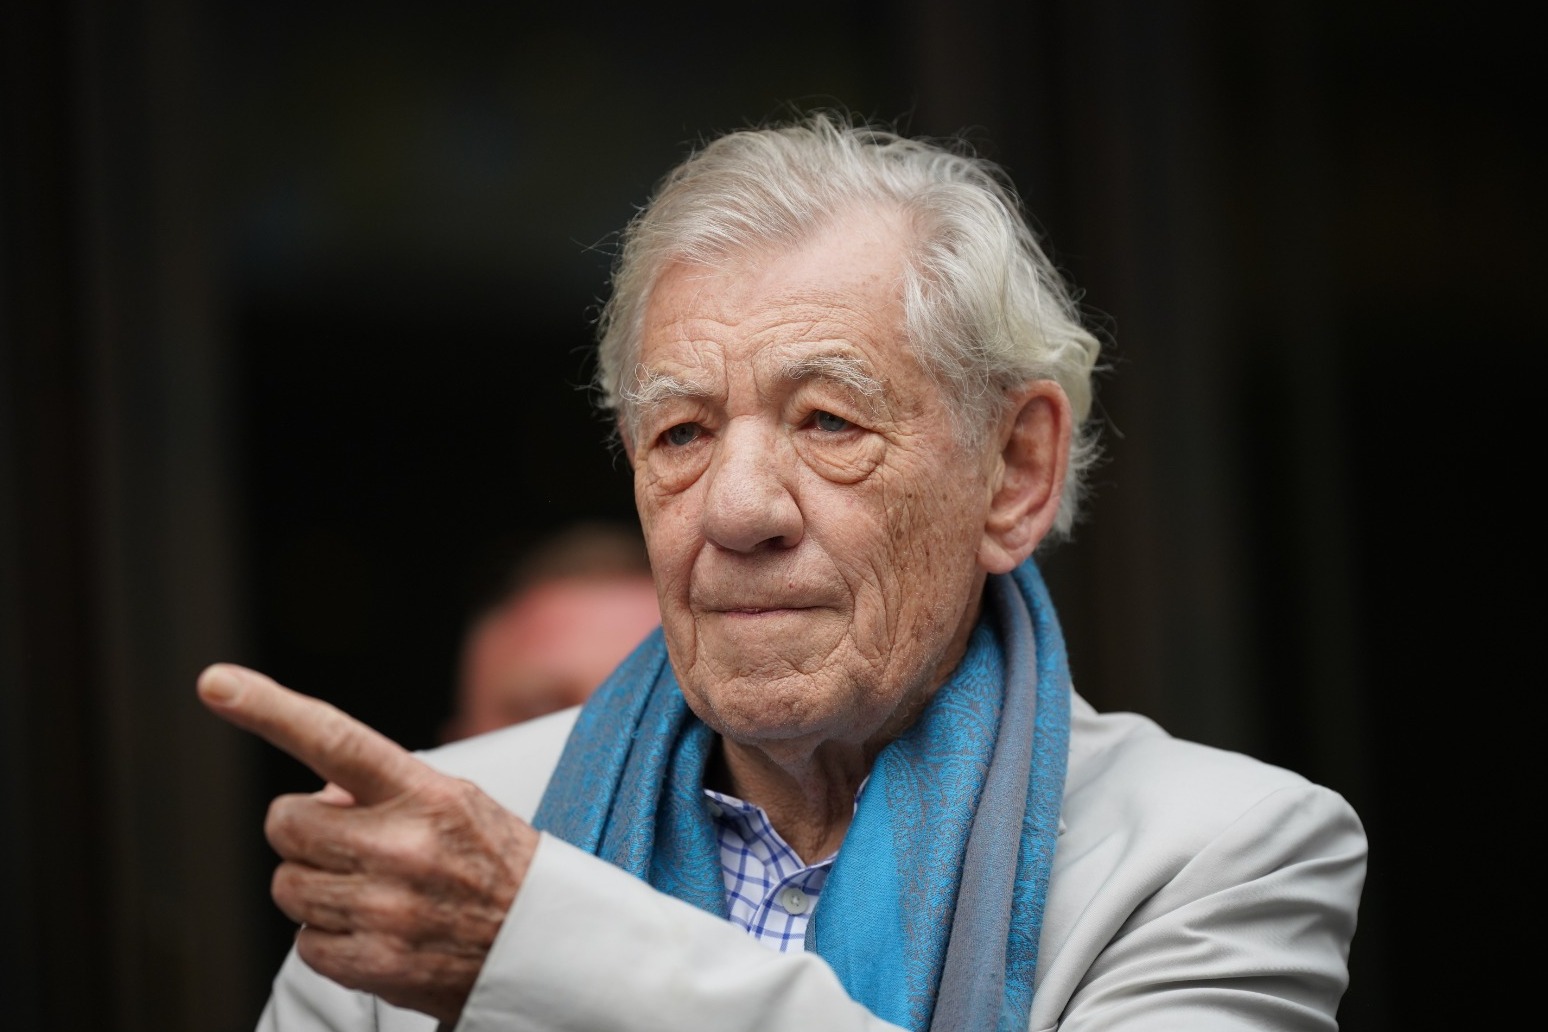 From Ian McKellen to Florence Pugh – 6 big London Fashion Week moments 